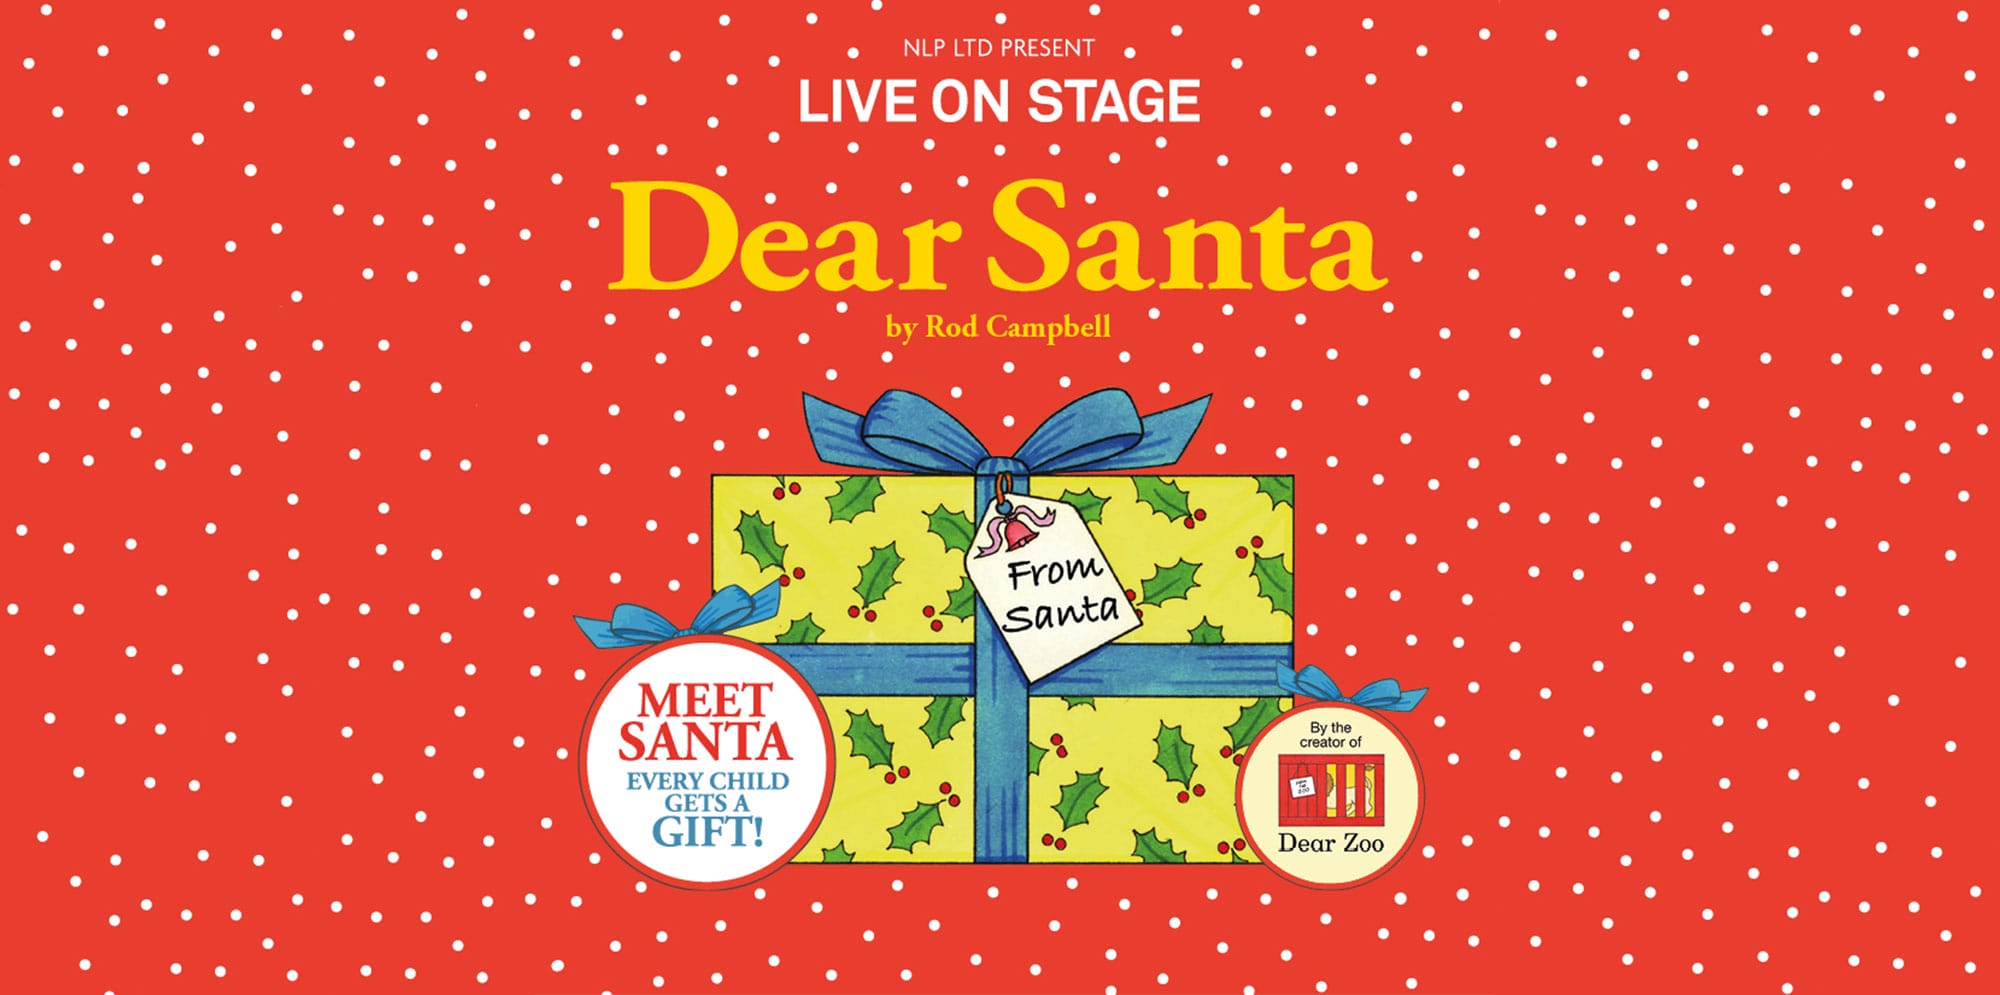 Illustration of a Christmas present on a red background with white spots. Text on the image reads Live on Stage Dear Santa.